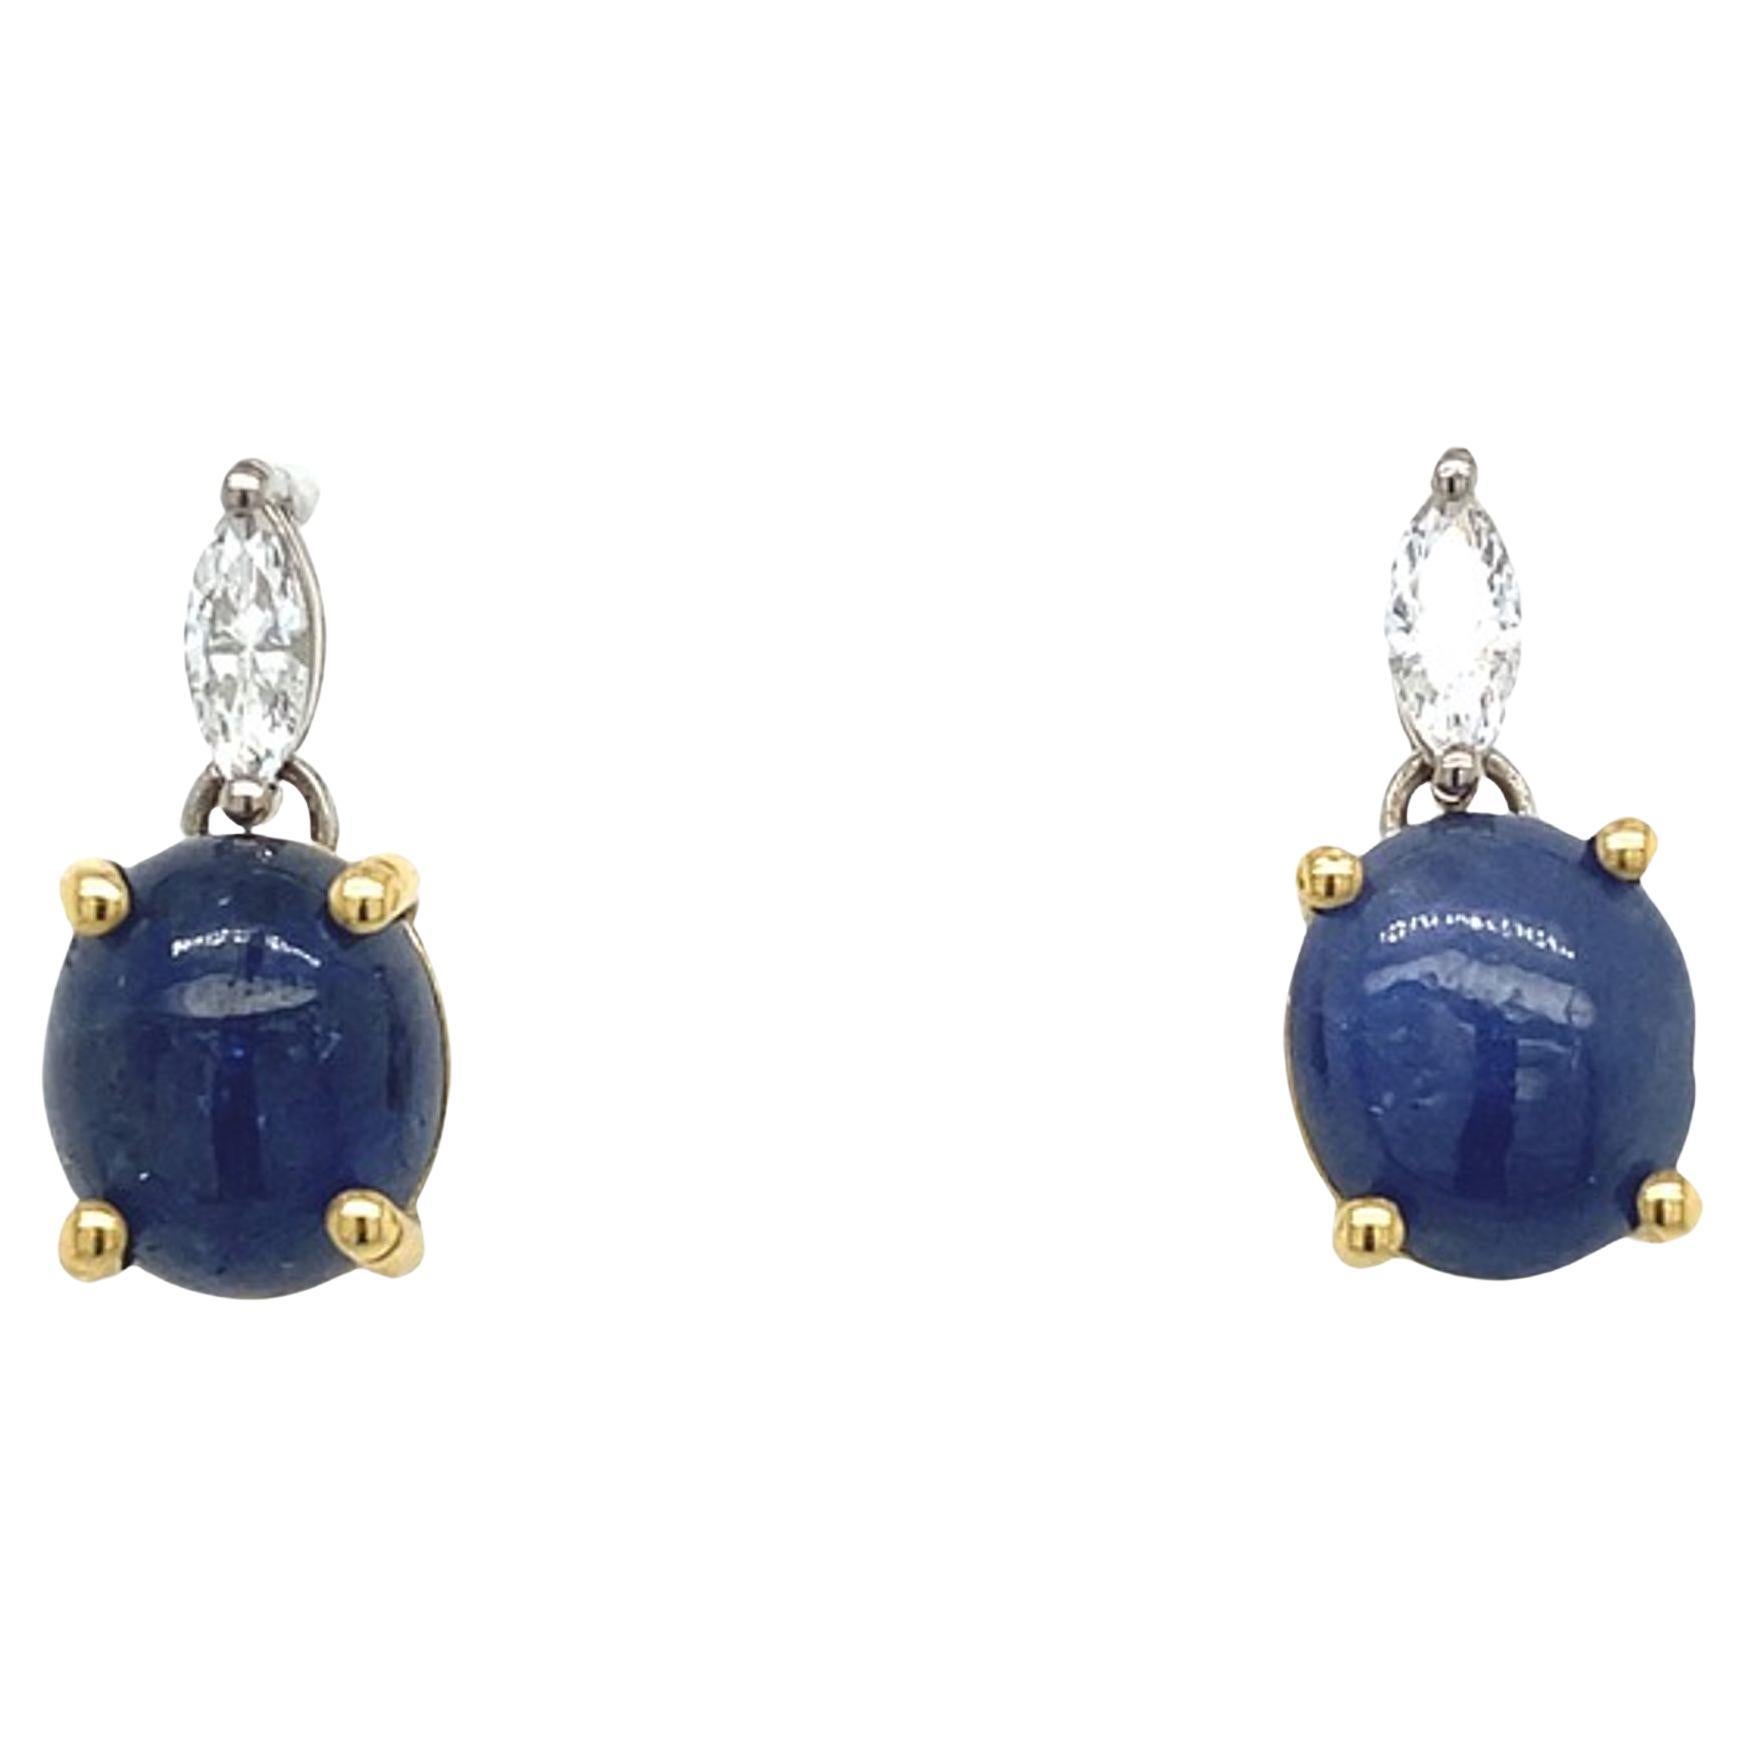 9.0ct Cabachon Sapphires with Matching 0.30ct Marquise Diamond Earrings For Sale